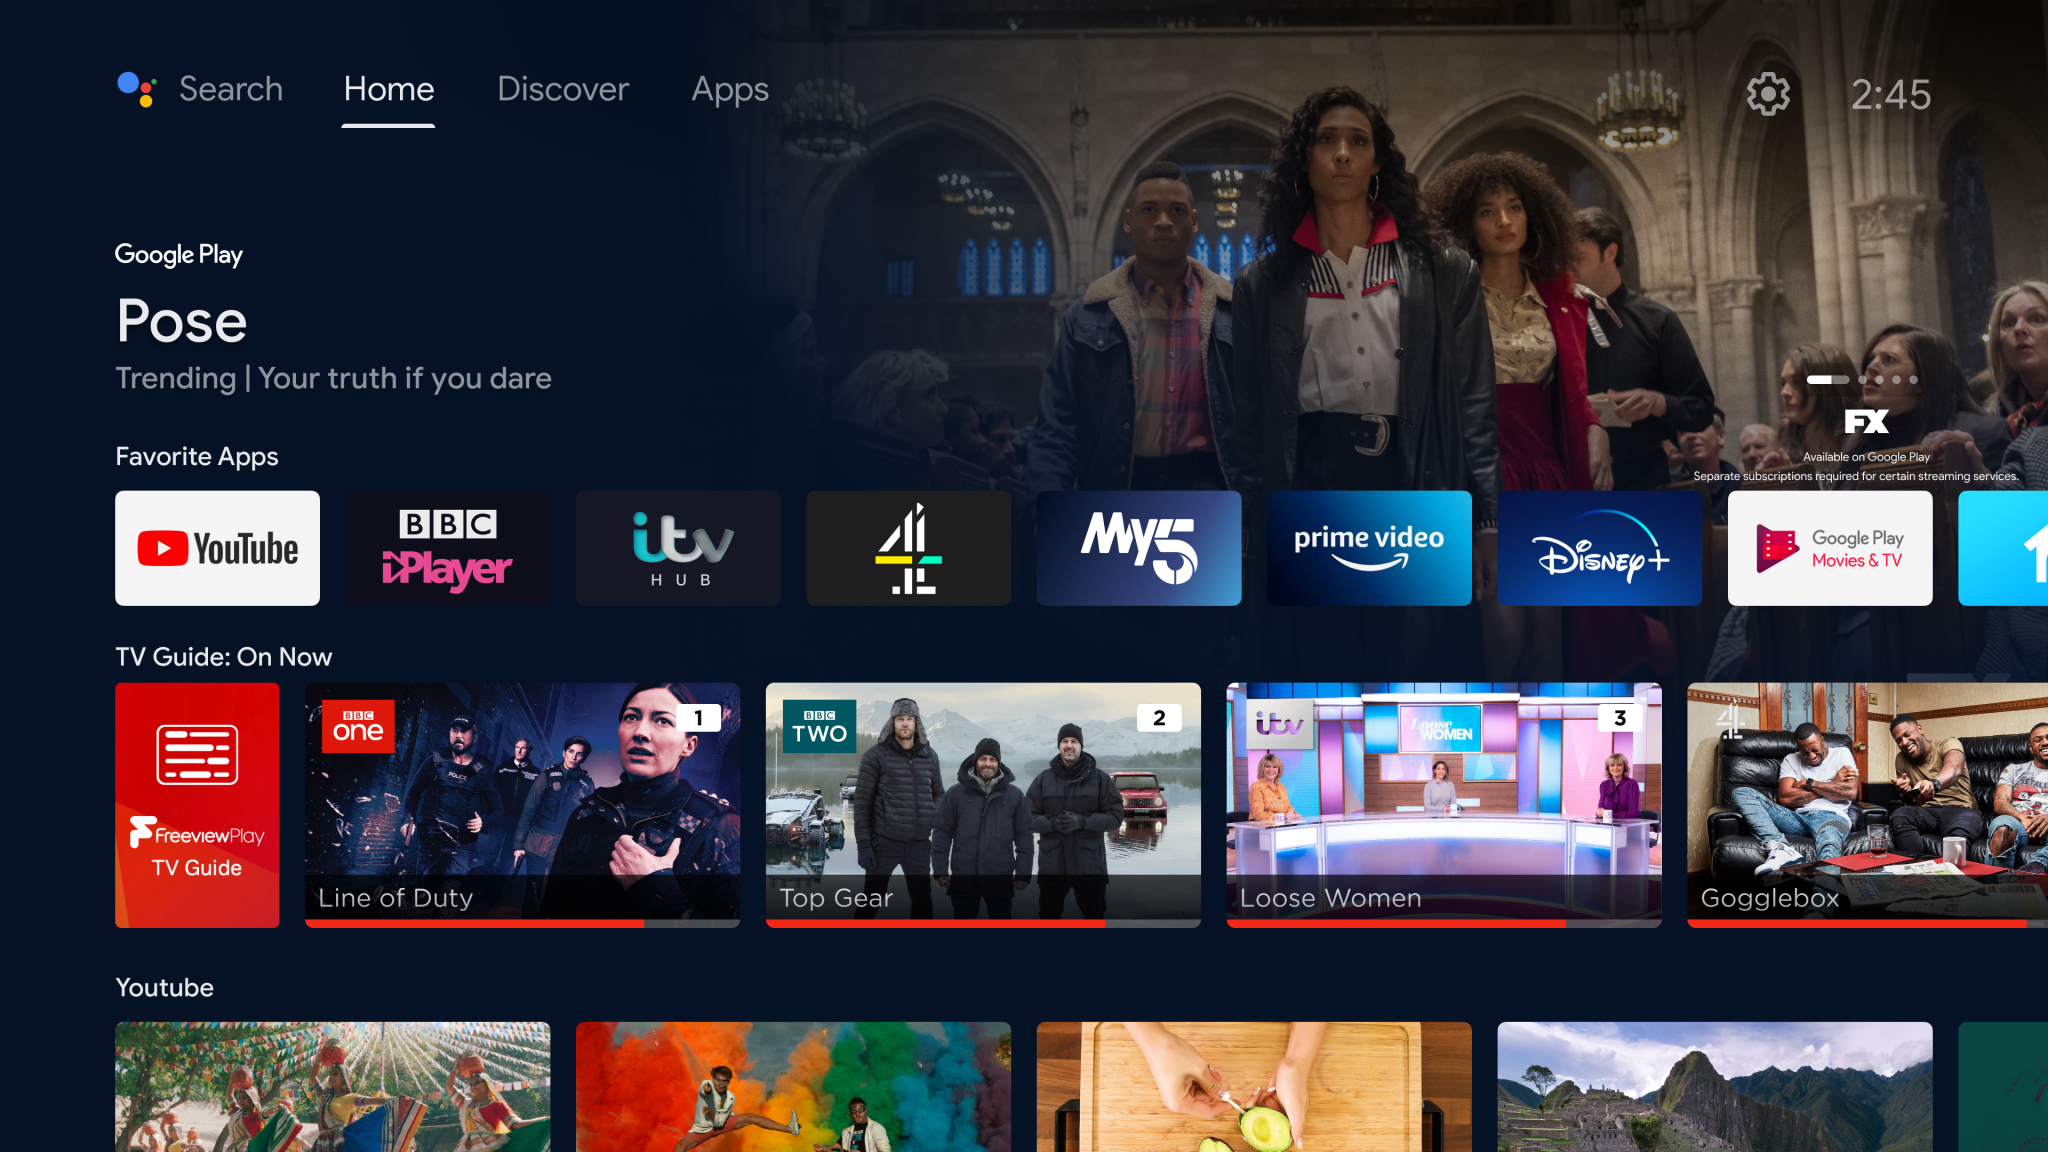 FIFA+ is now available on both Google TV & Android TV